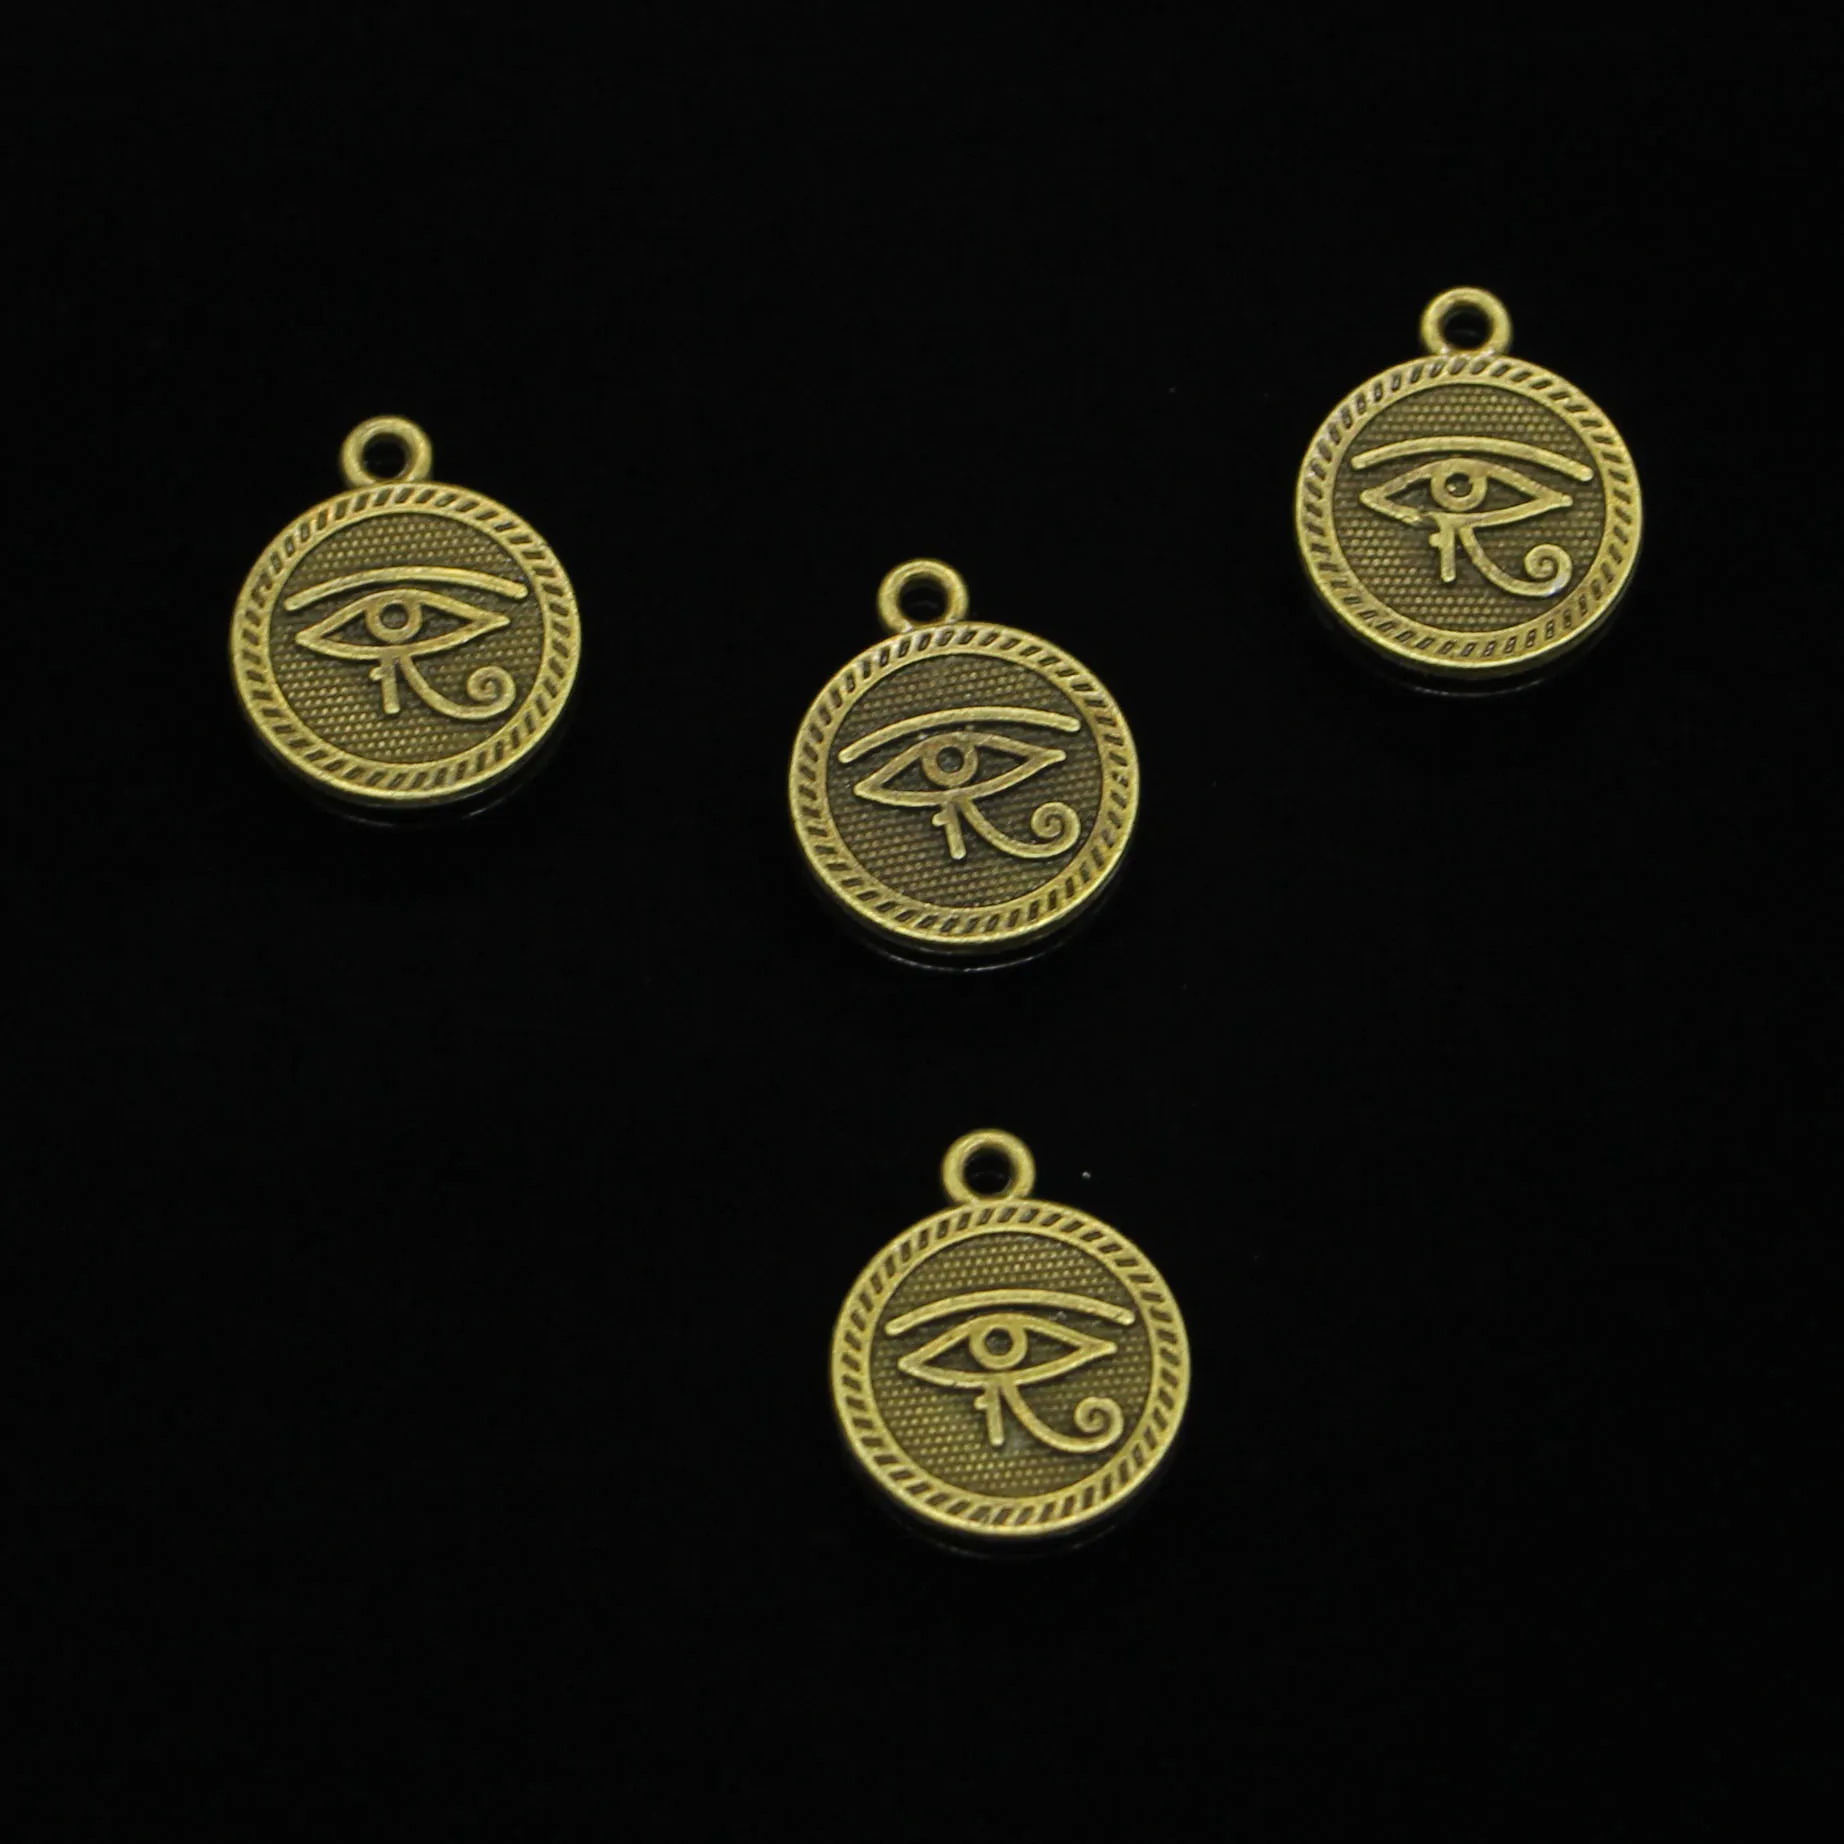 67pcs Zinc Alloy Charms Antique Bronze Plated Eye of Horus Charms for Jewelry Making DIY Handmade Pendants 15mm